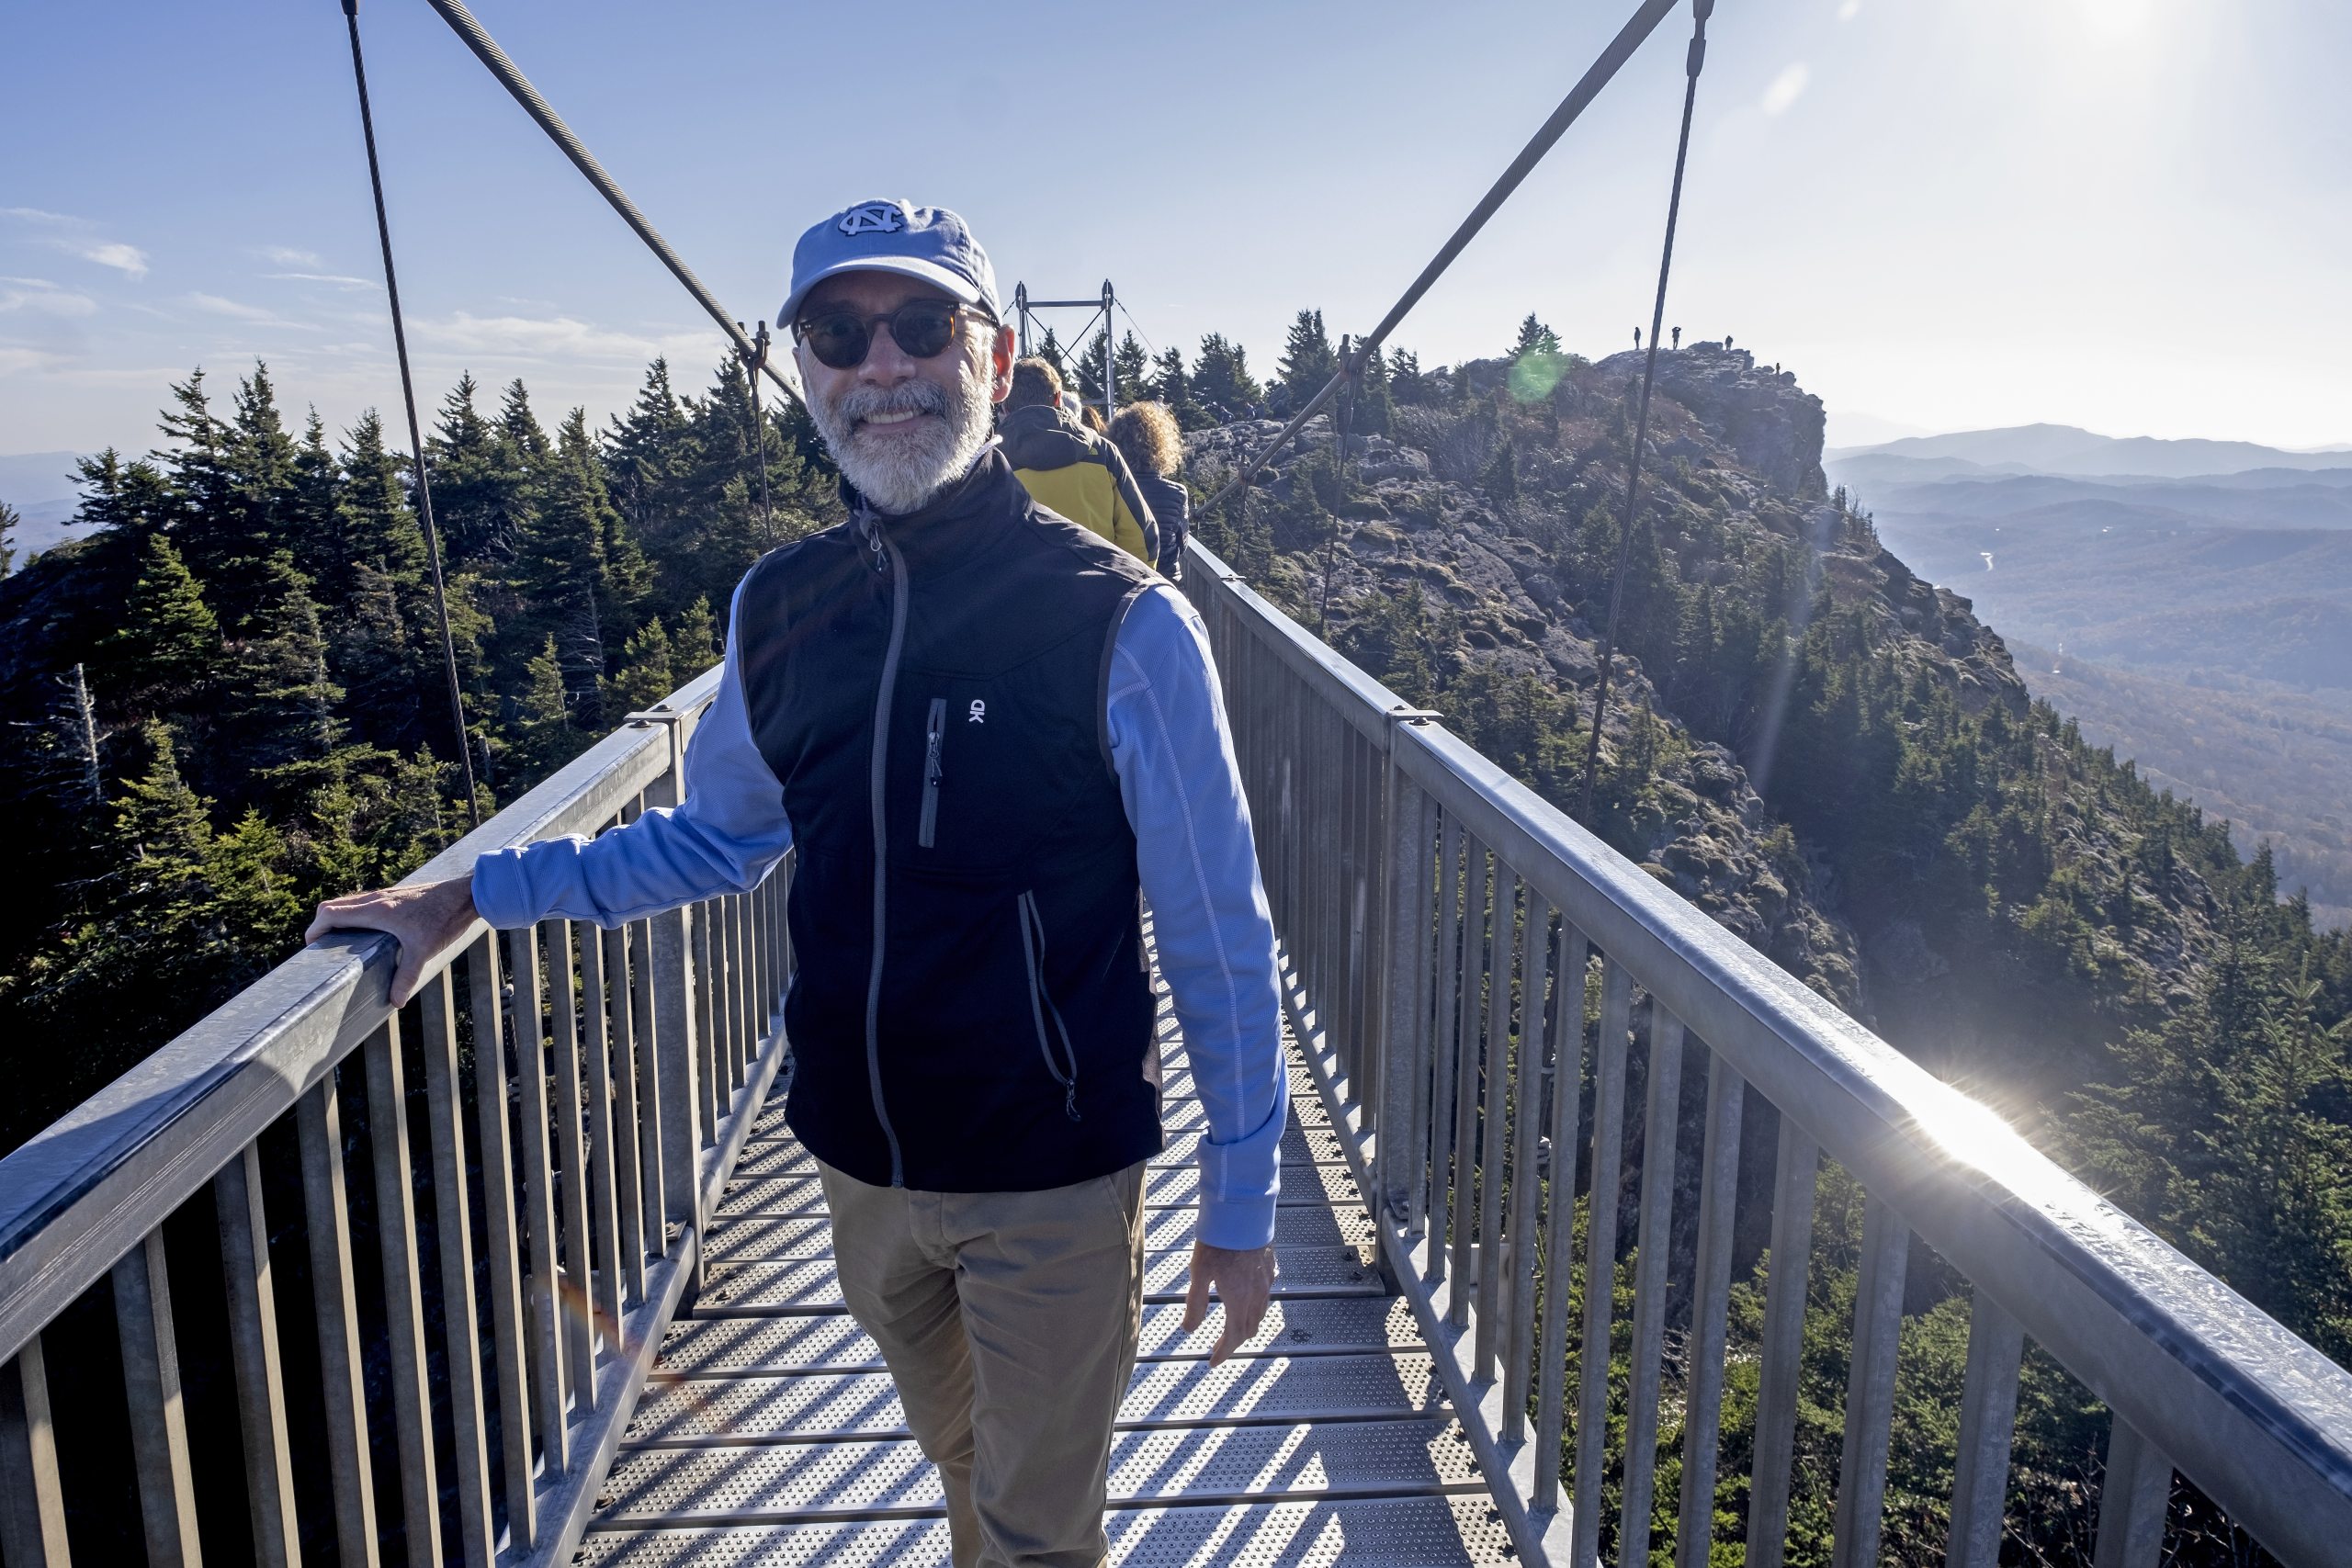 Man on a swinging bridge at the top of a mountain